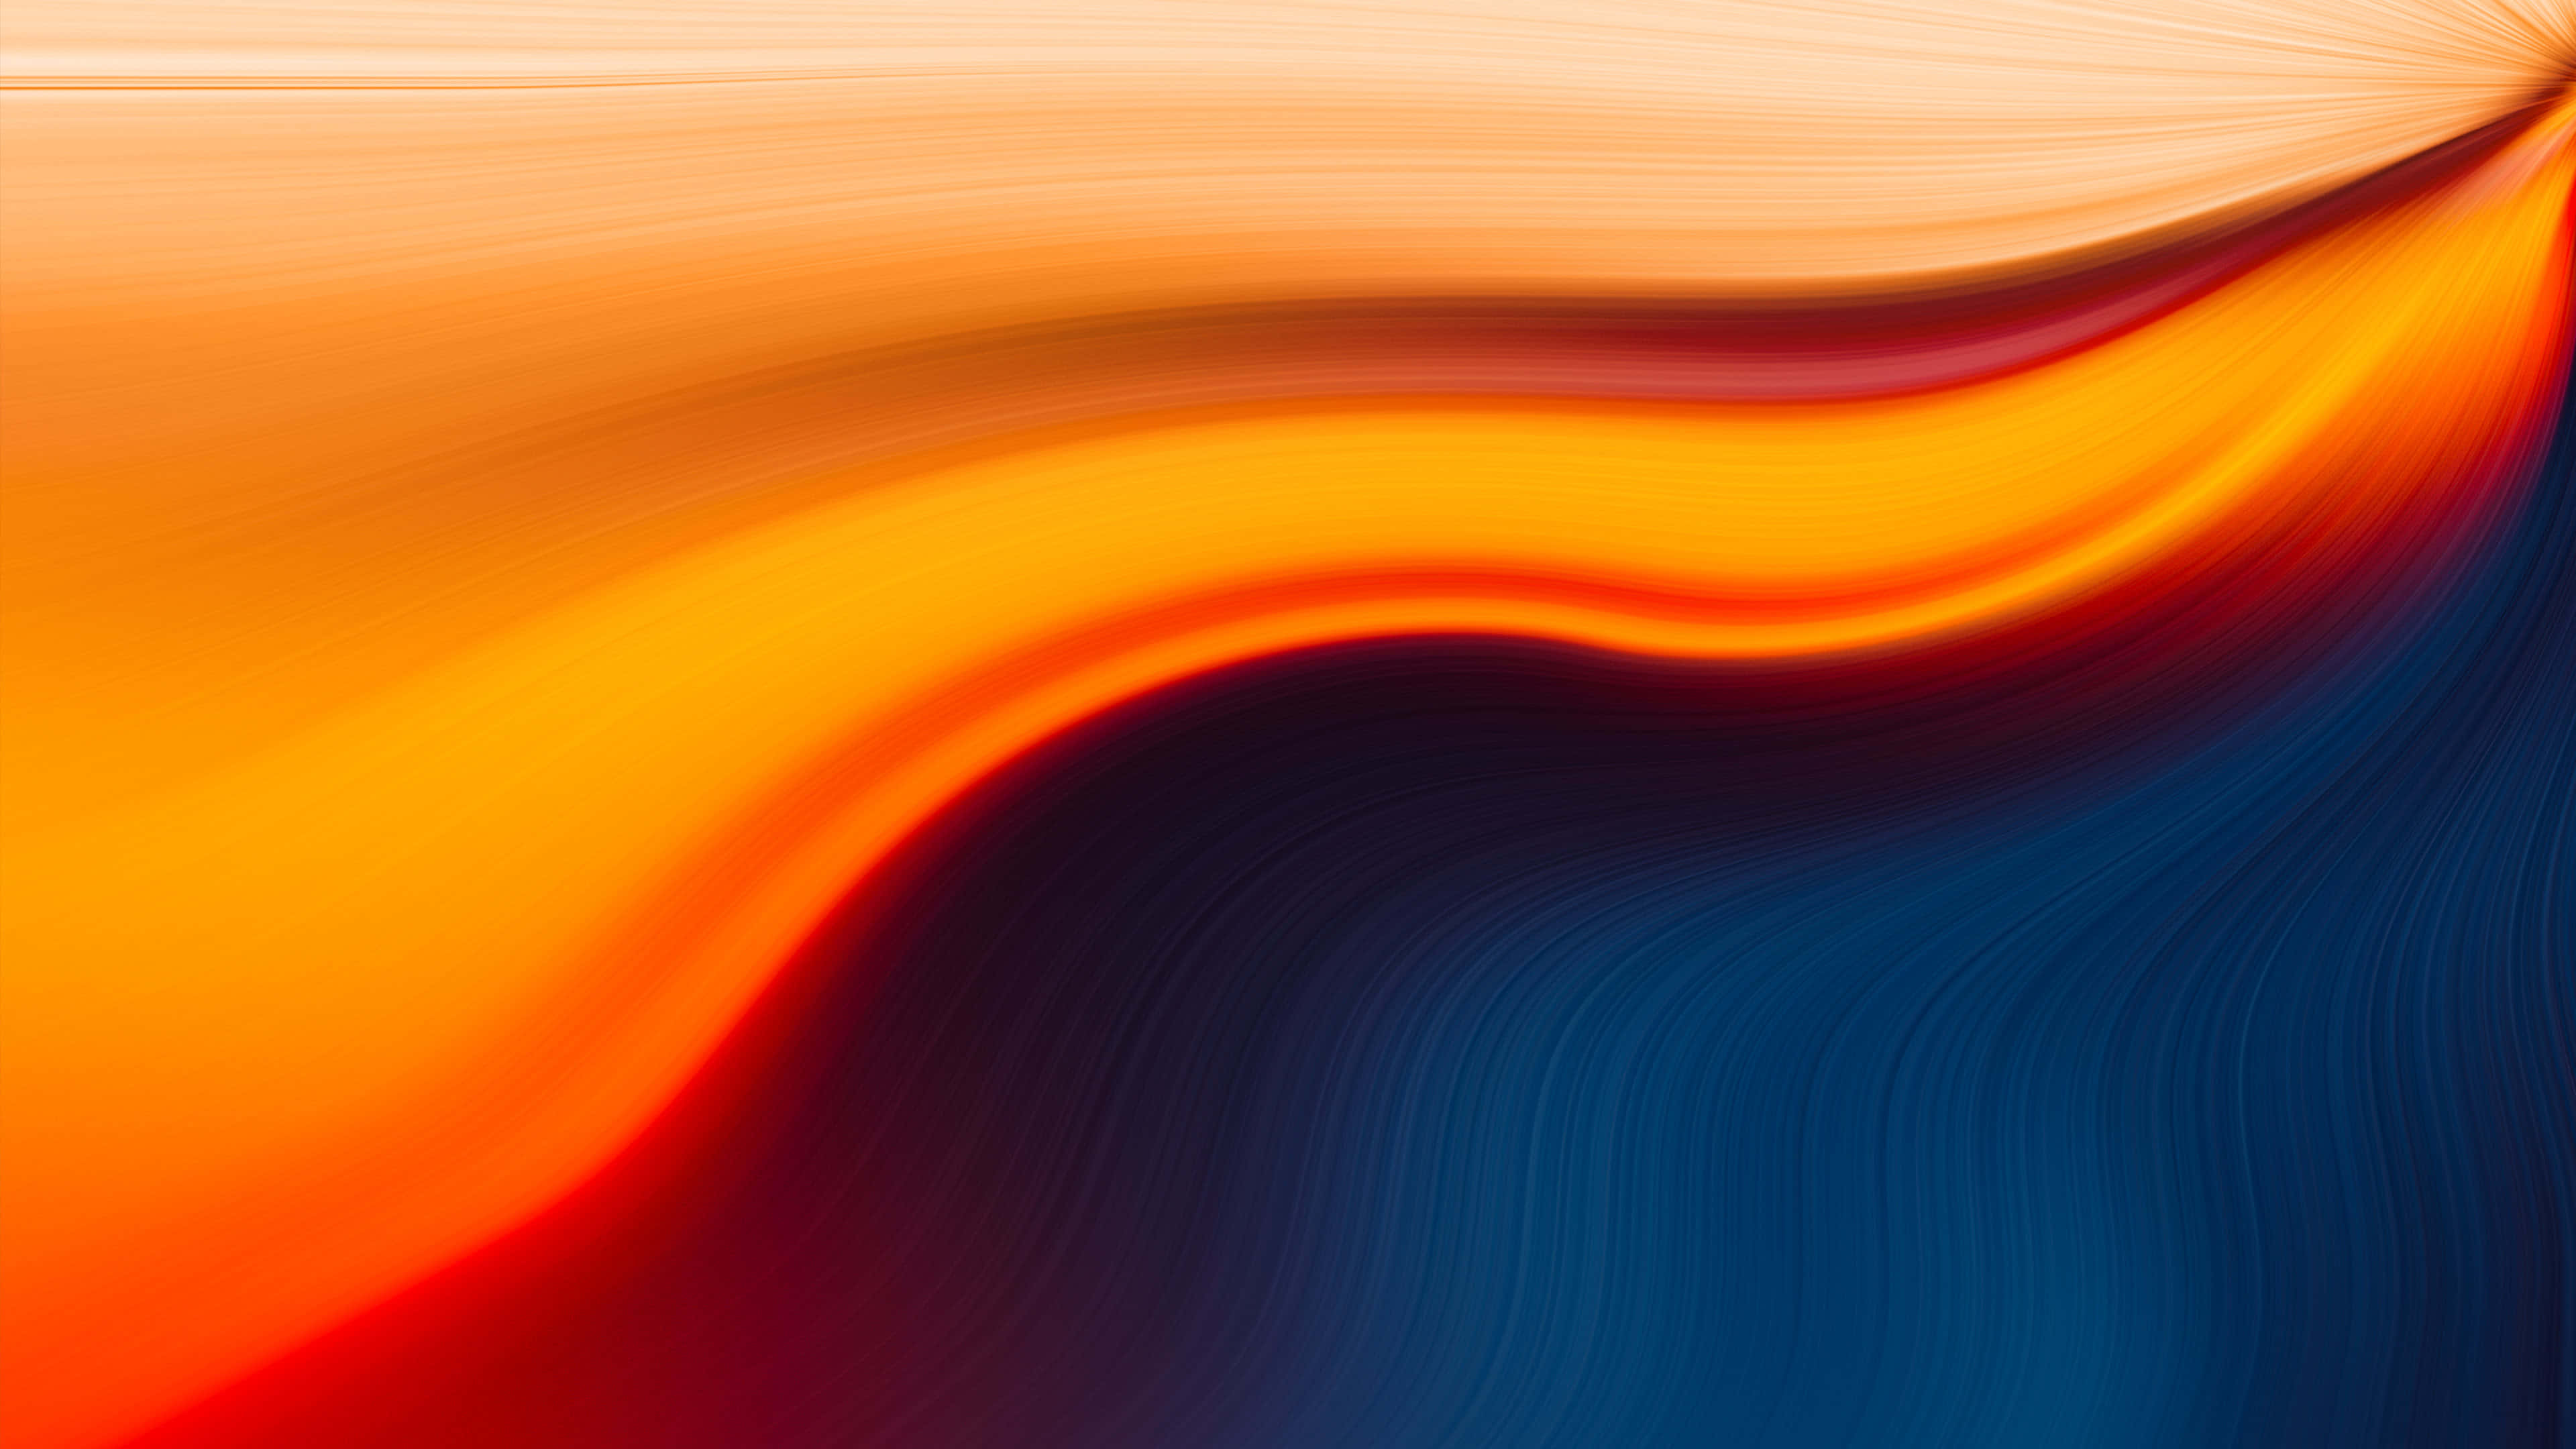 Caption: Majestic 4k Abstract Waves Artwork Wallpaper